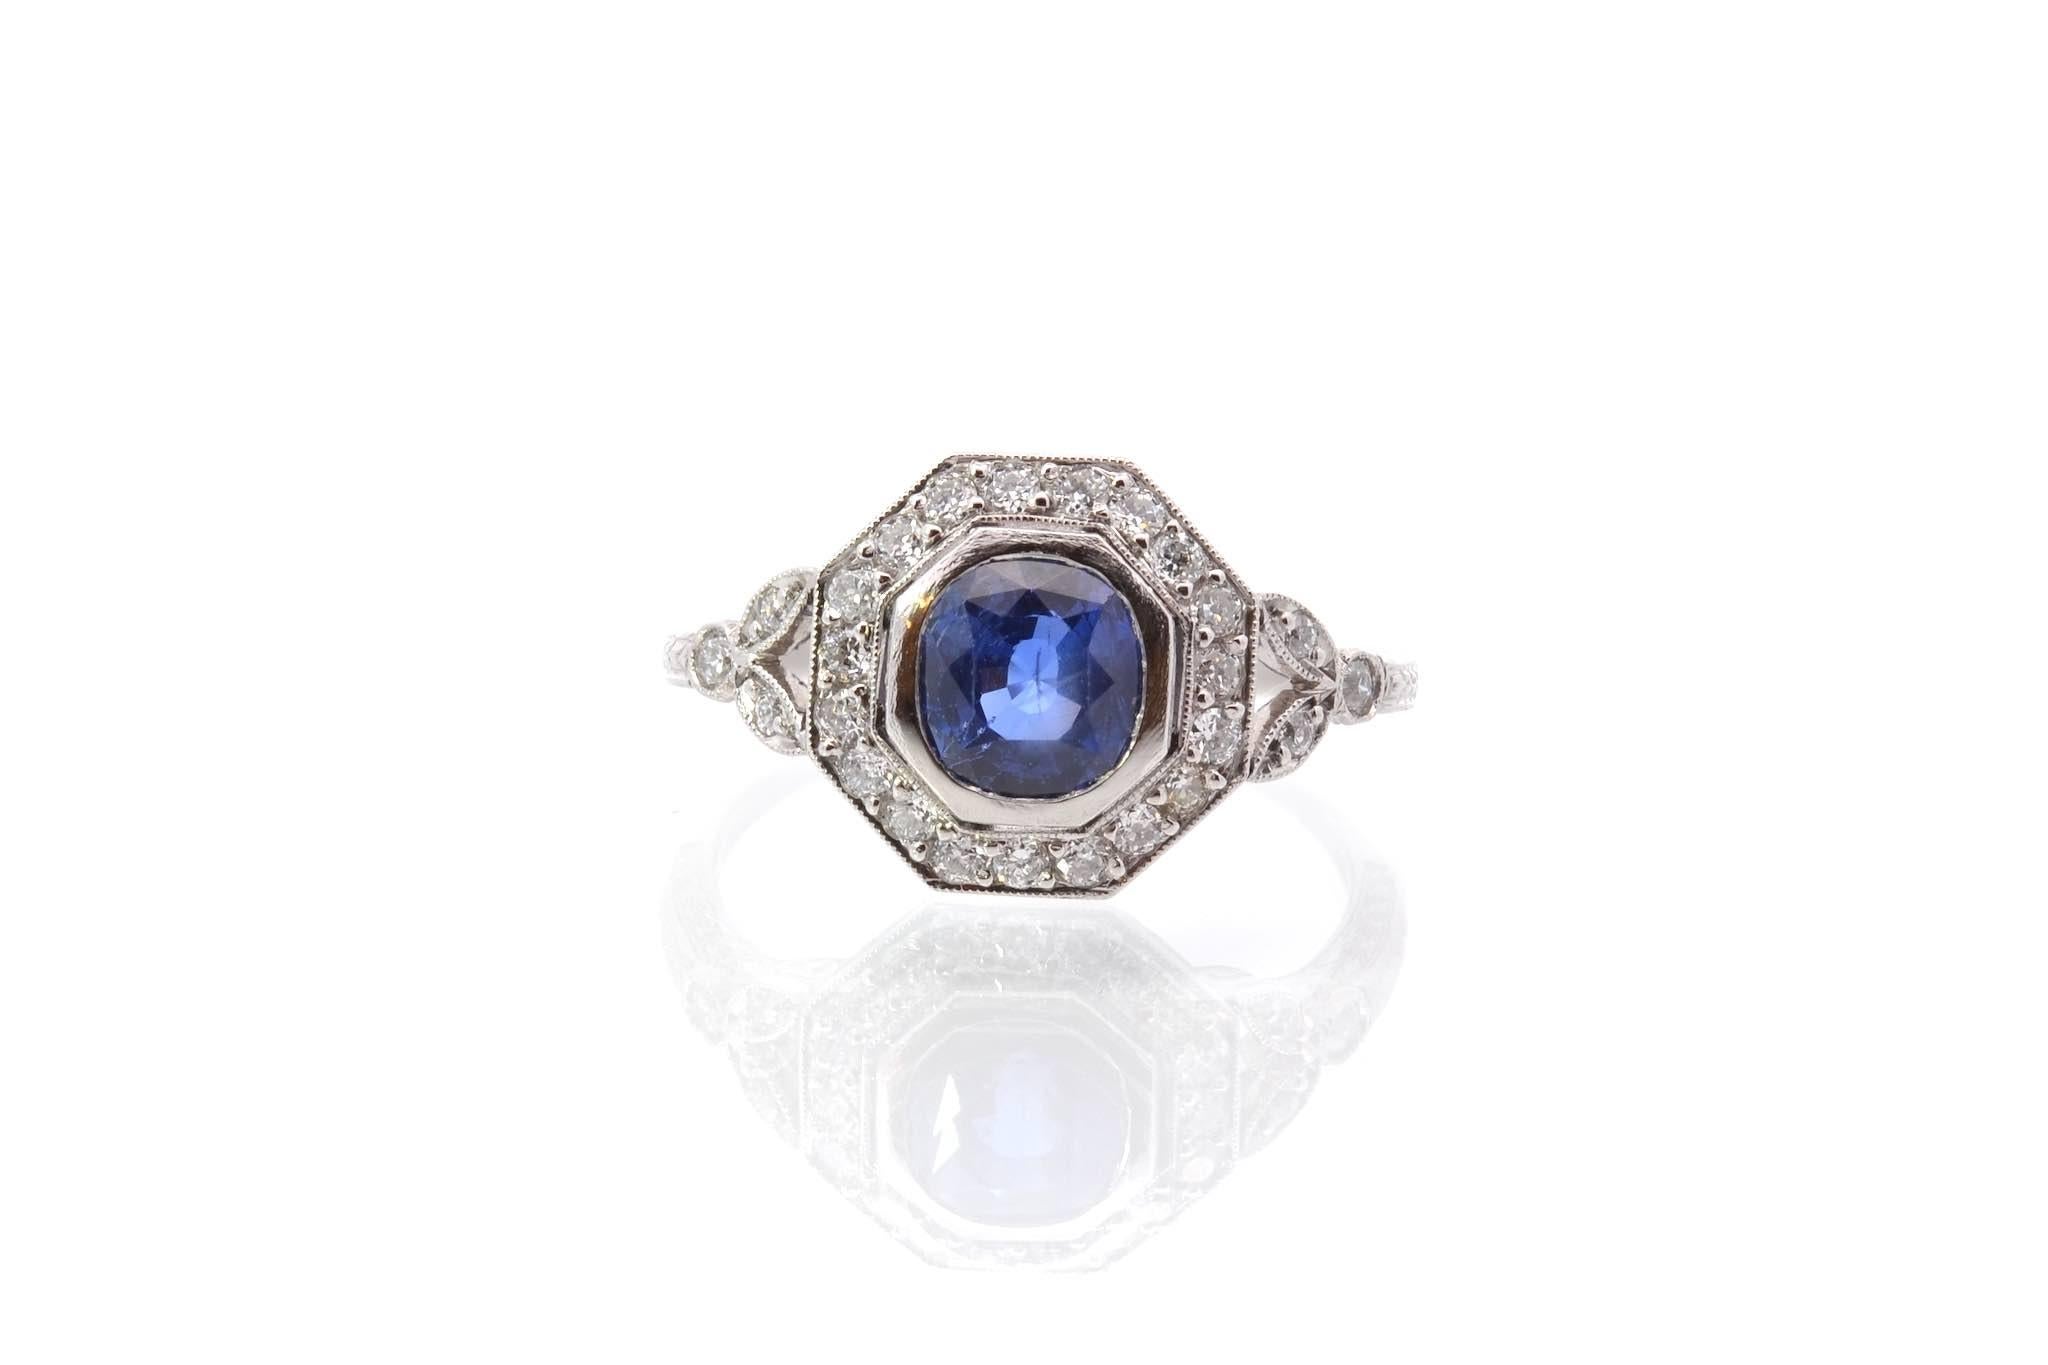 Stones: Sapphire: 1.46 cts, 25 diamonds: 0.40 ct.
Material: Platinum
Dimensions: 1.2 cm
Weight: 4.7g
Period: Recent art deco style (handmade)
Size: 54 (free sizing)
Certificate
Ref. : 25140